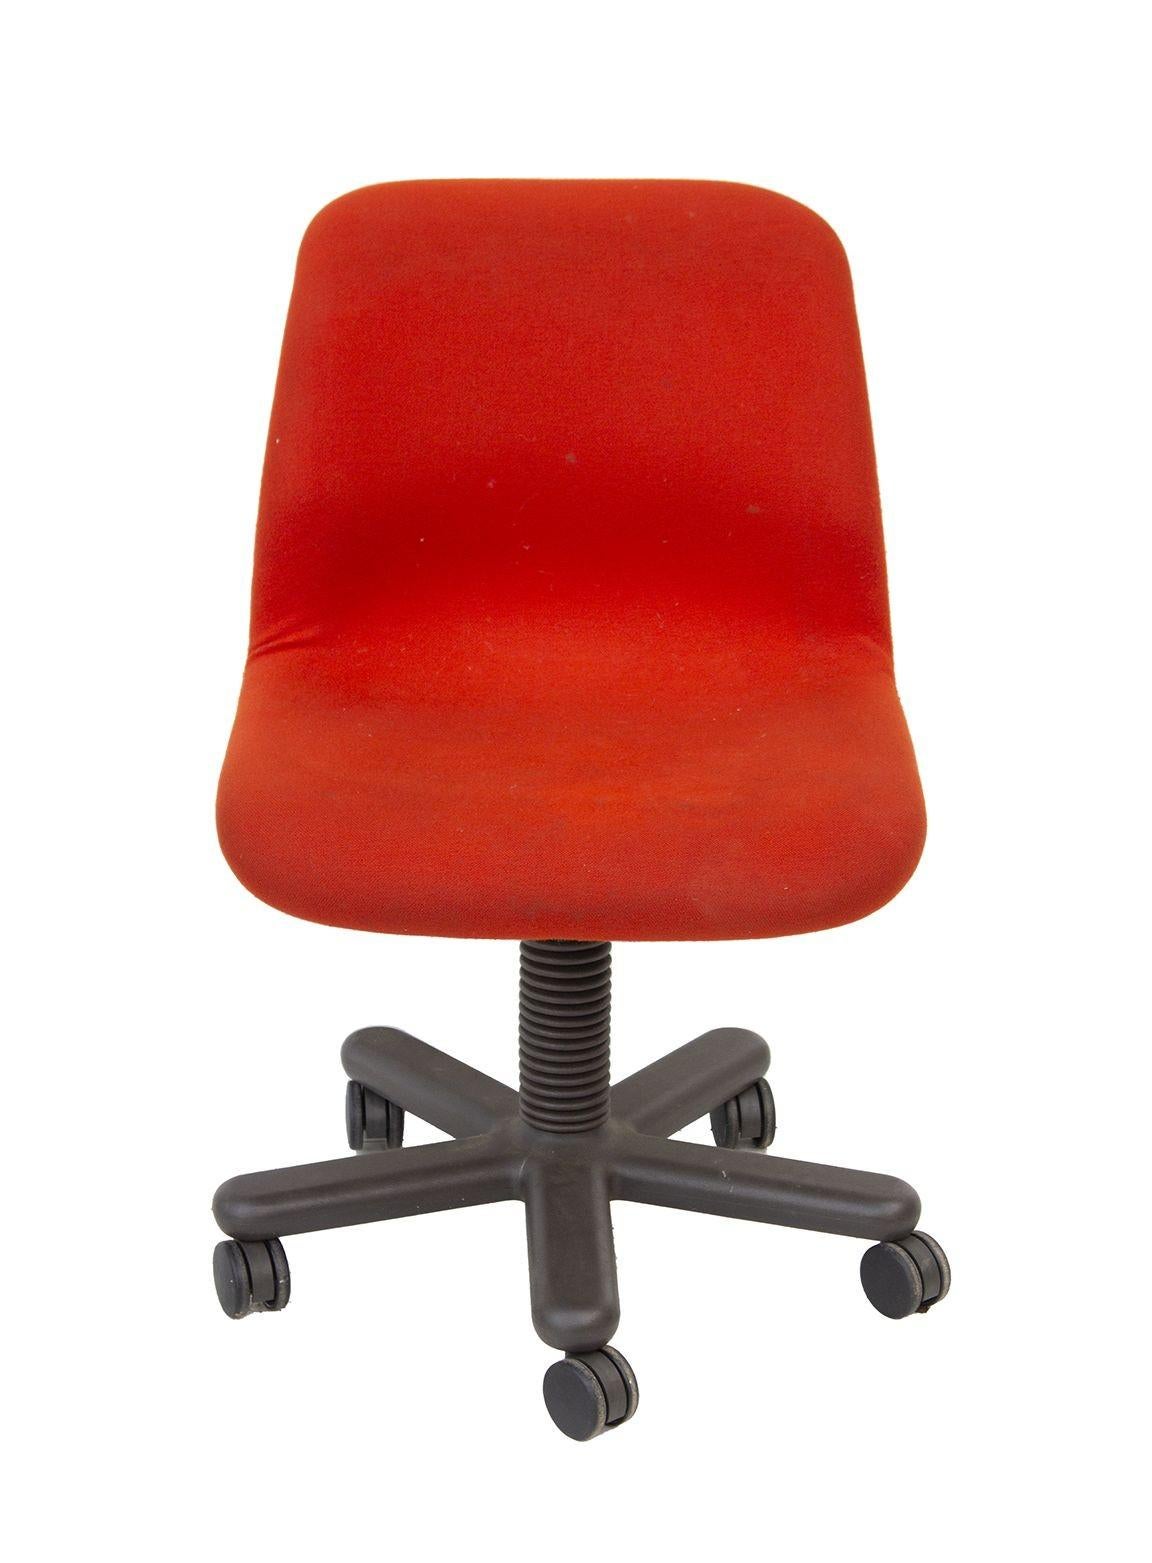 Post-Modern 1980s Task Chair Designed by Niels Diffrient for Knoll For Sale